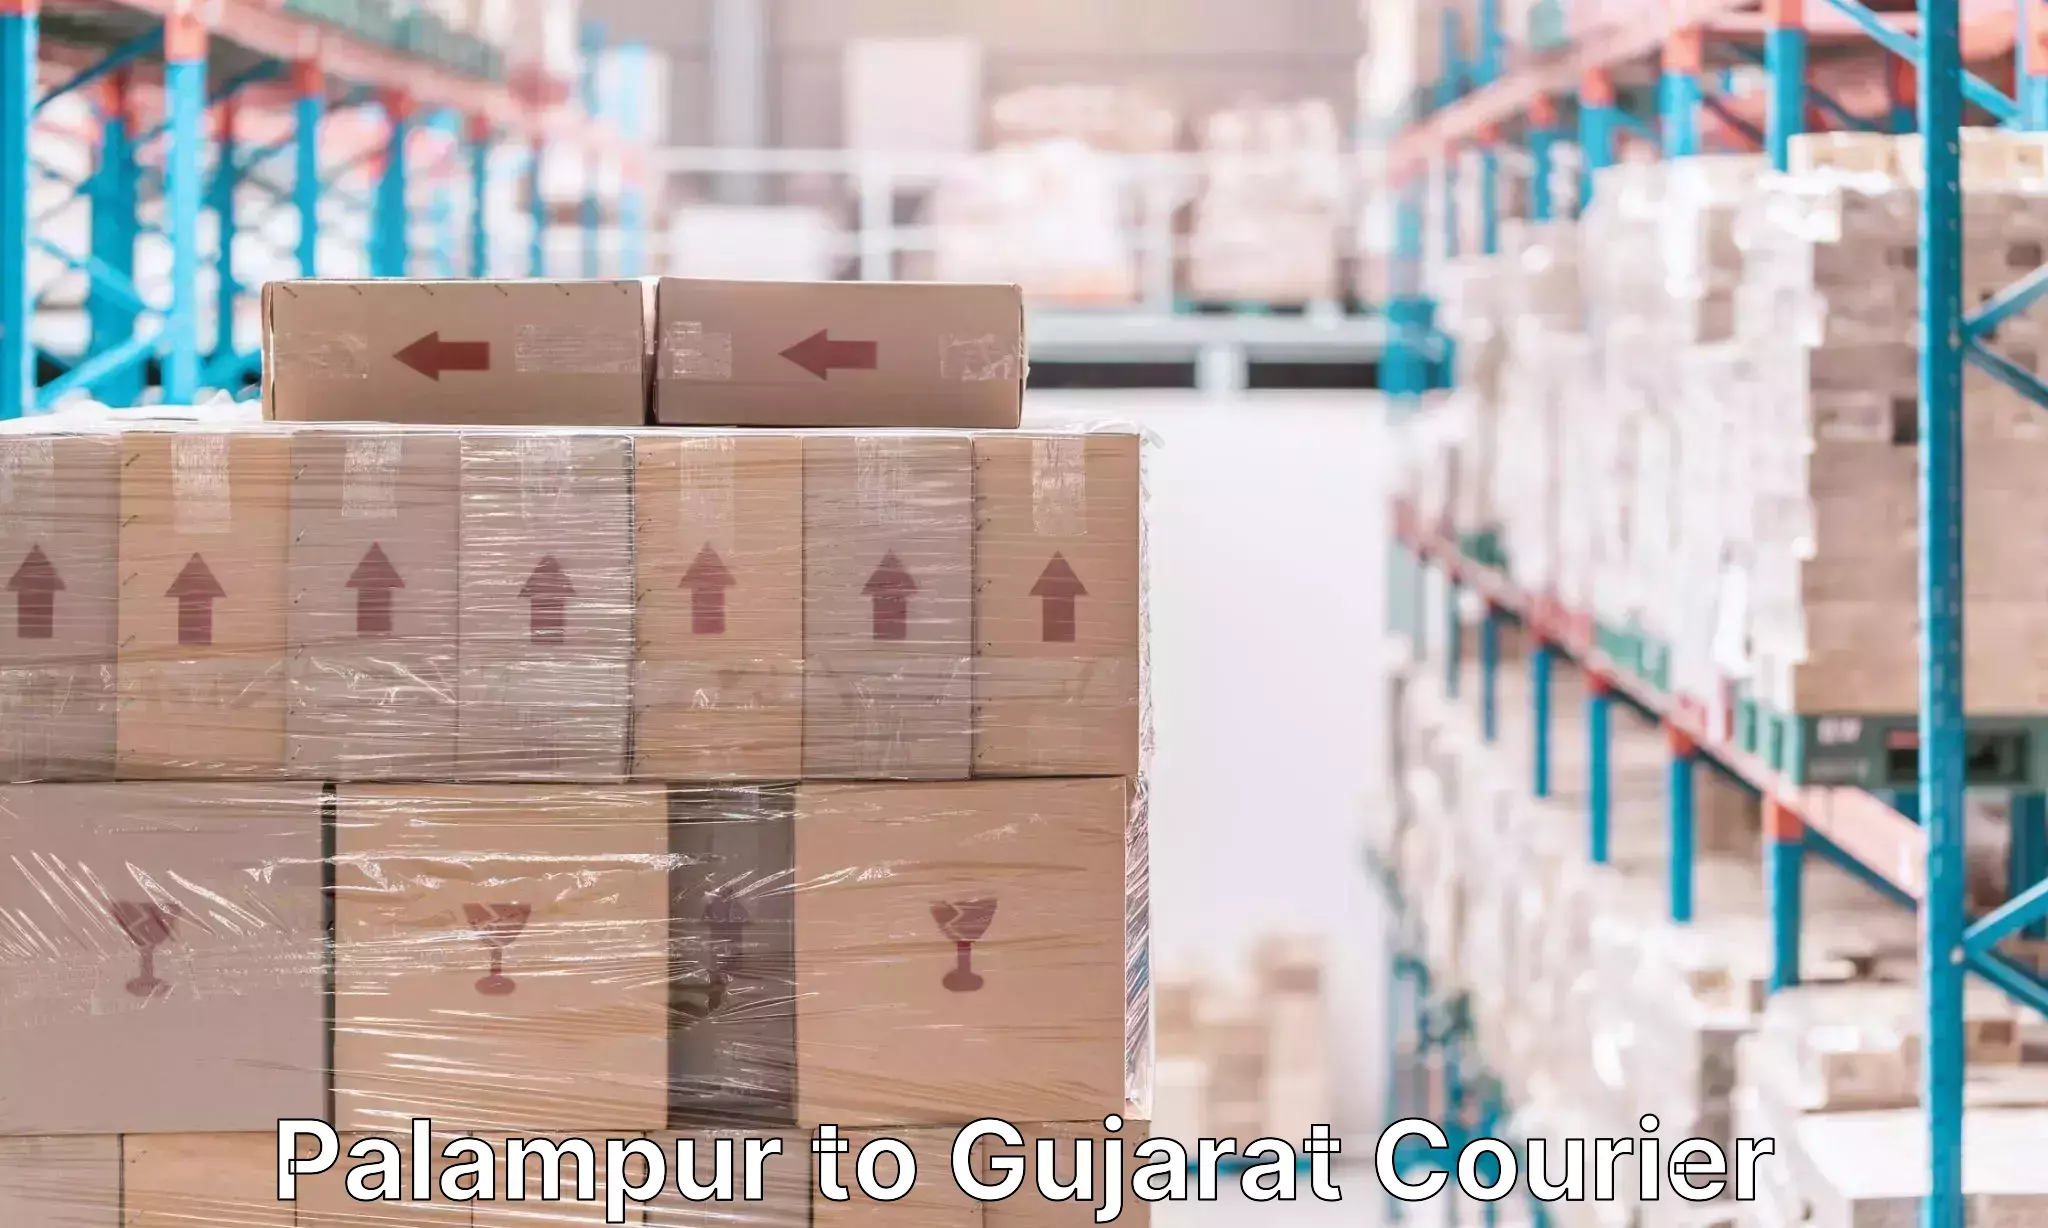 Luggage delivery network Palampur to Gujarat